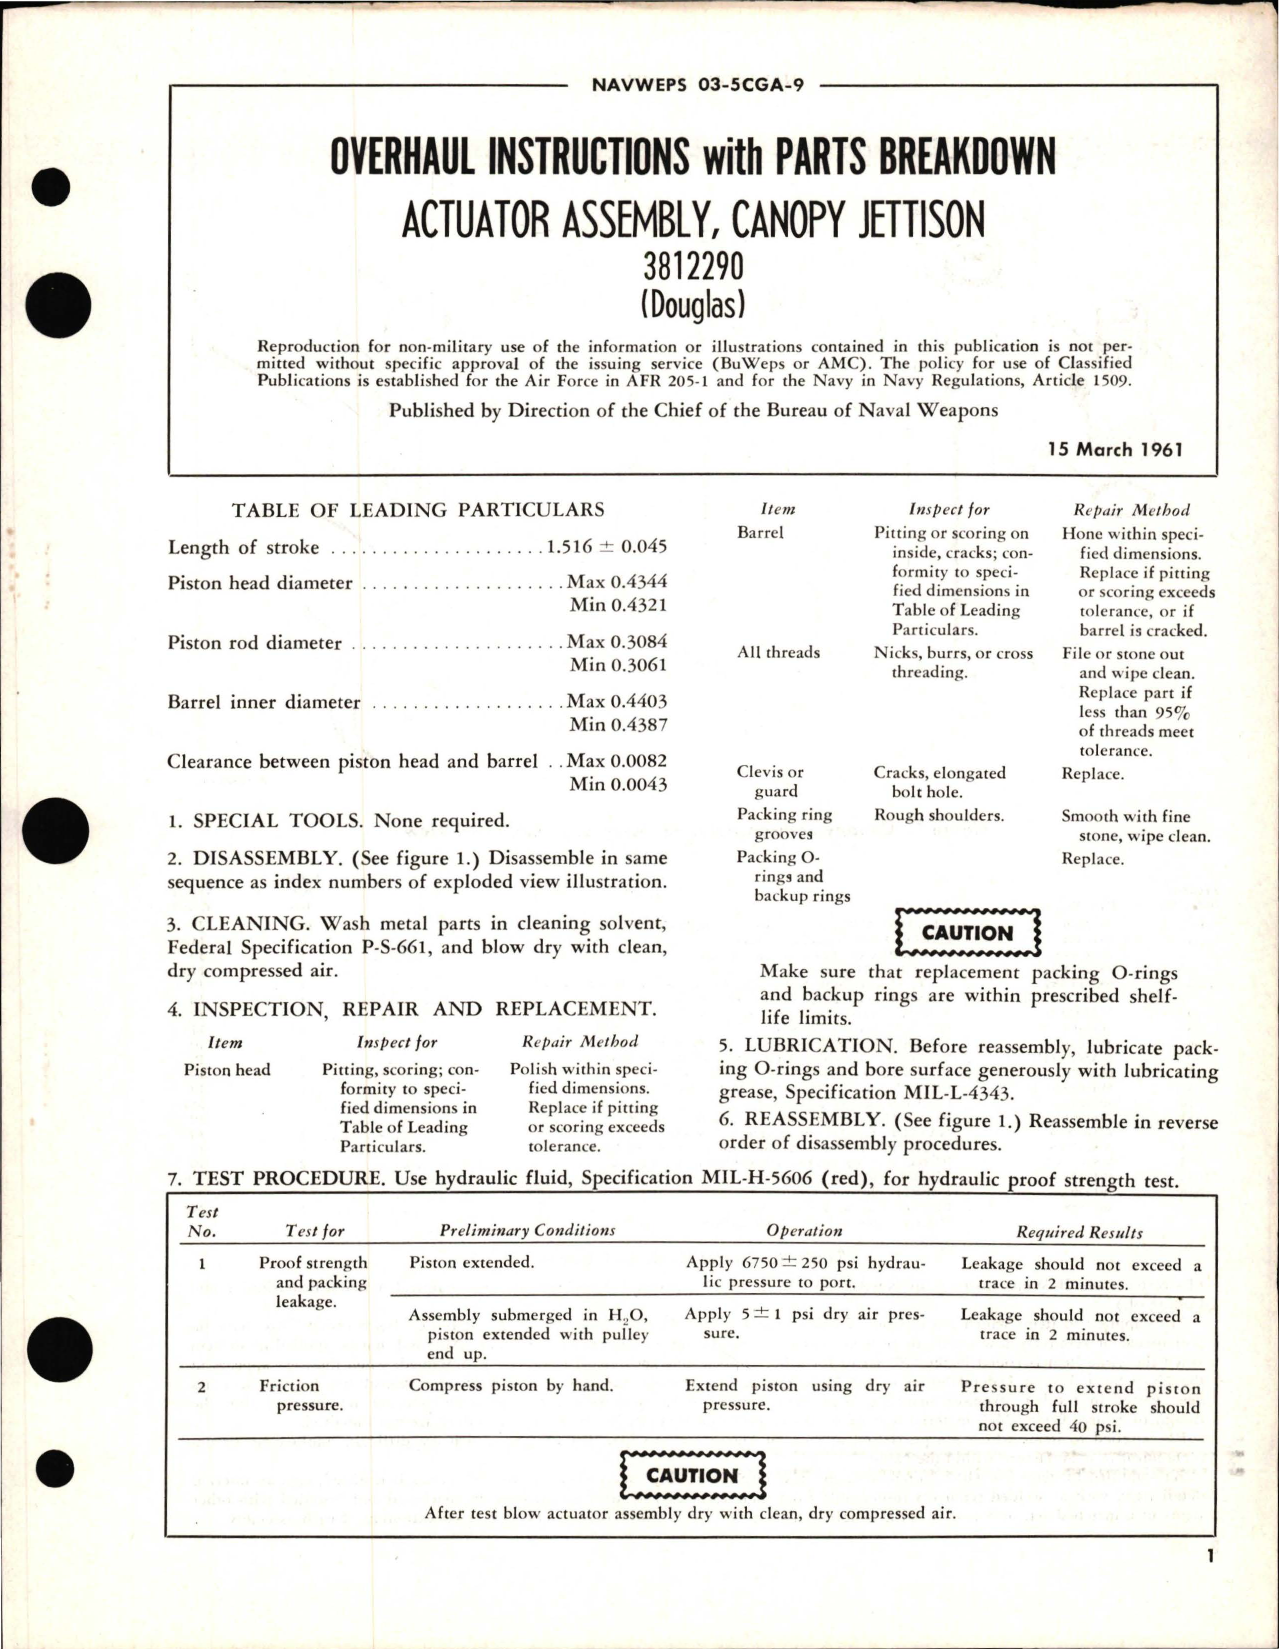 Sample page 1 from AirCorps Library document: Overhaul Instructions with Parts Breakdown for Actuator Assembly, Canopy Jettison 3812290 